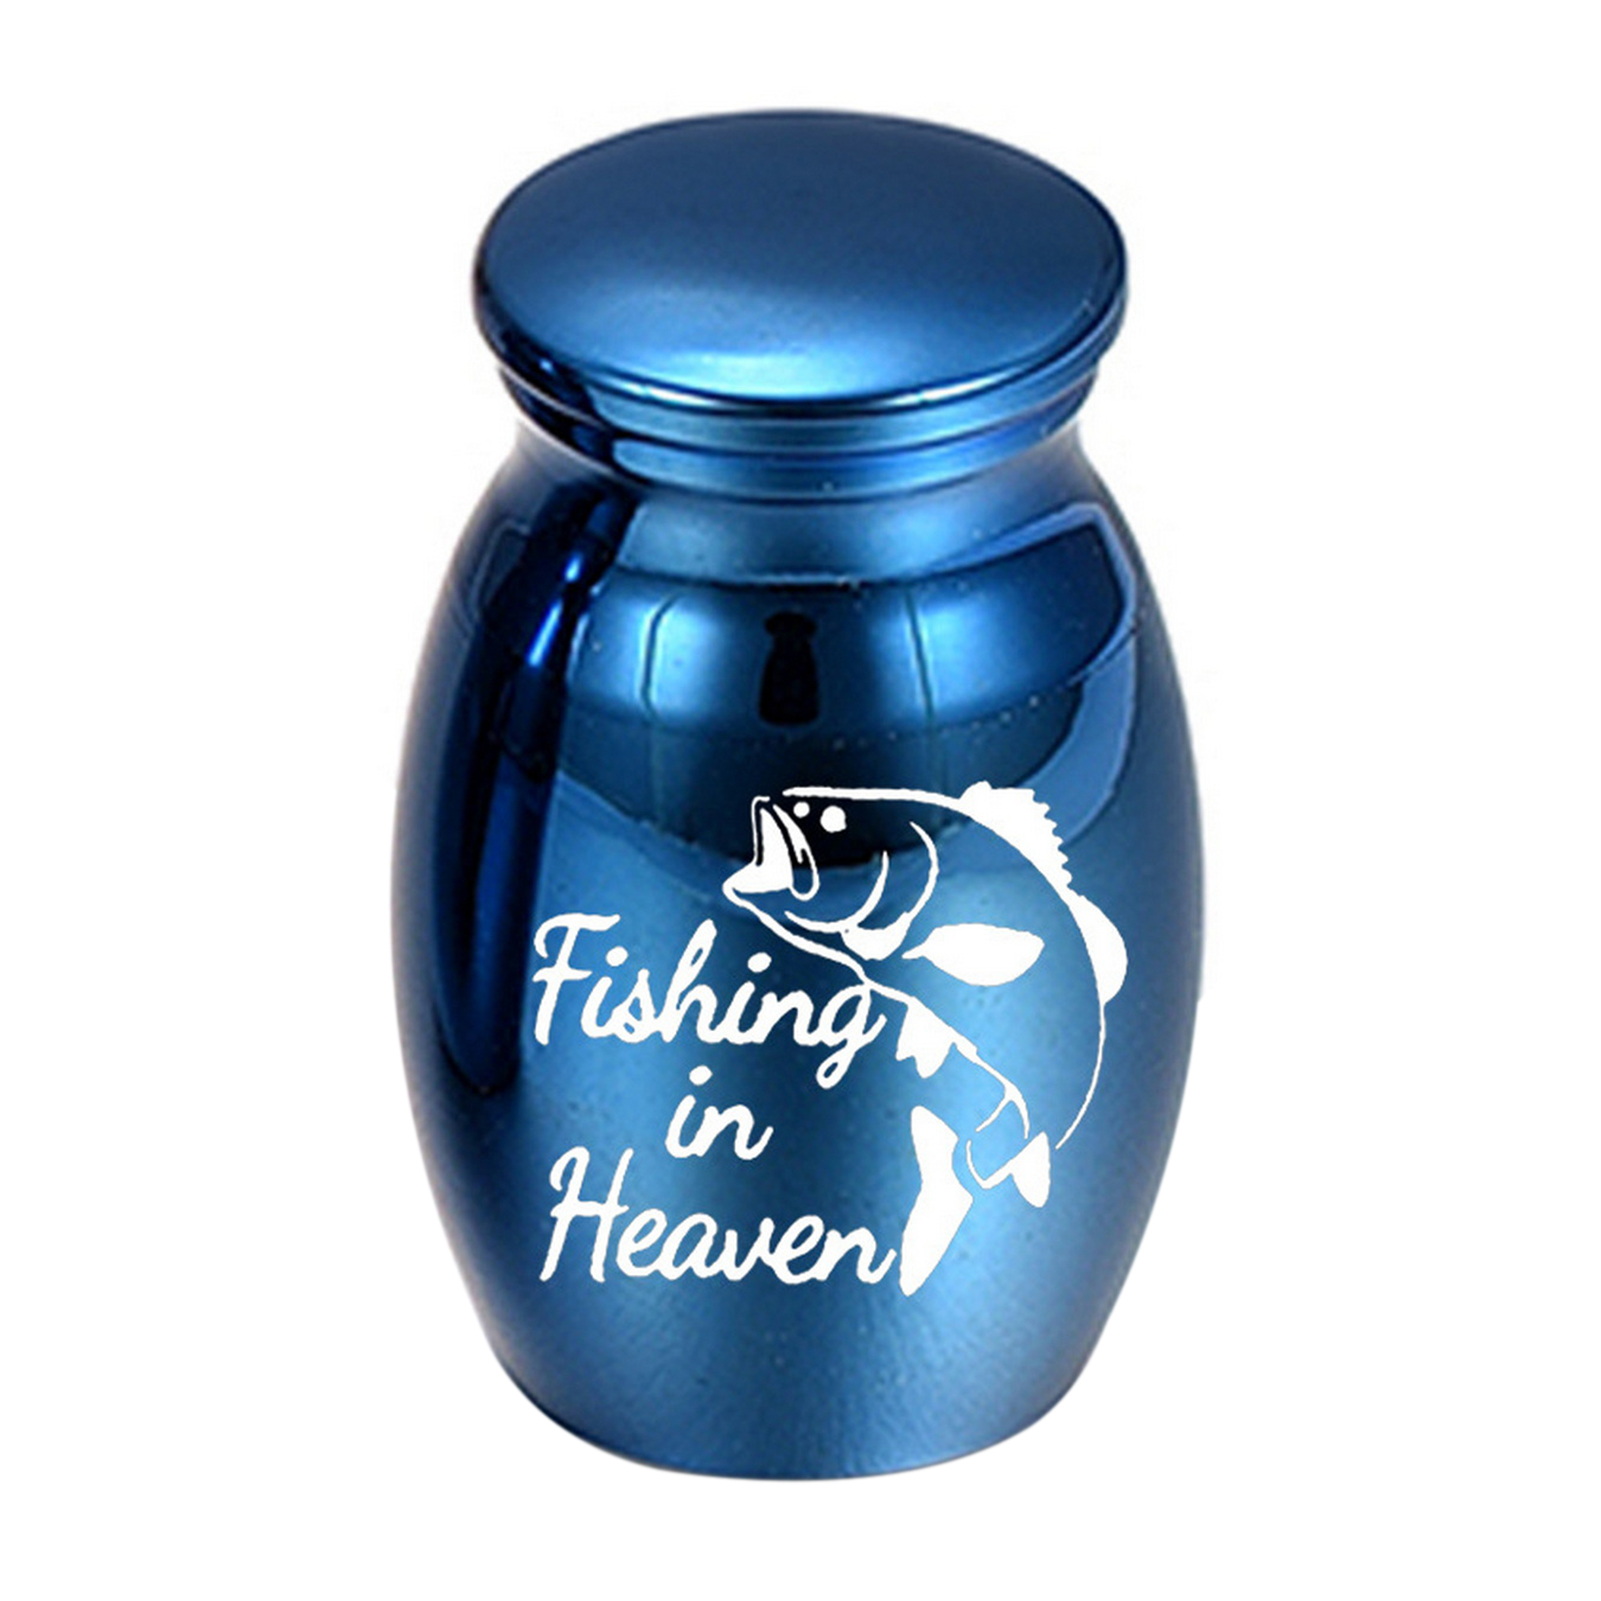 Lightweight Pet Urn Metal Pet Urn Heavenly Fishing Pet Urn Small Metal  Cremation Box for Dog/cat Ashes Beautiful Memorial Keepsake with Printed  Thread Lid Ideal